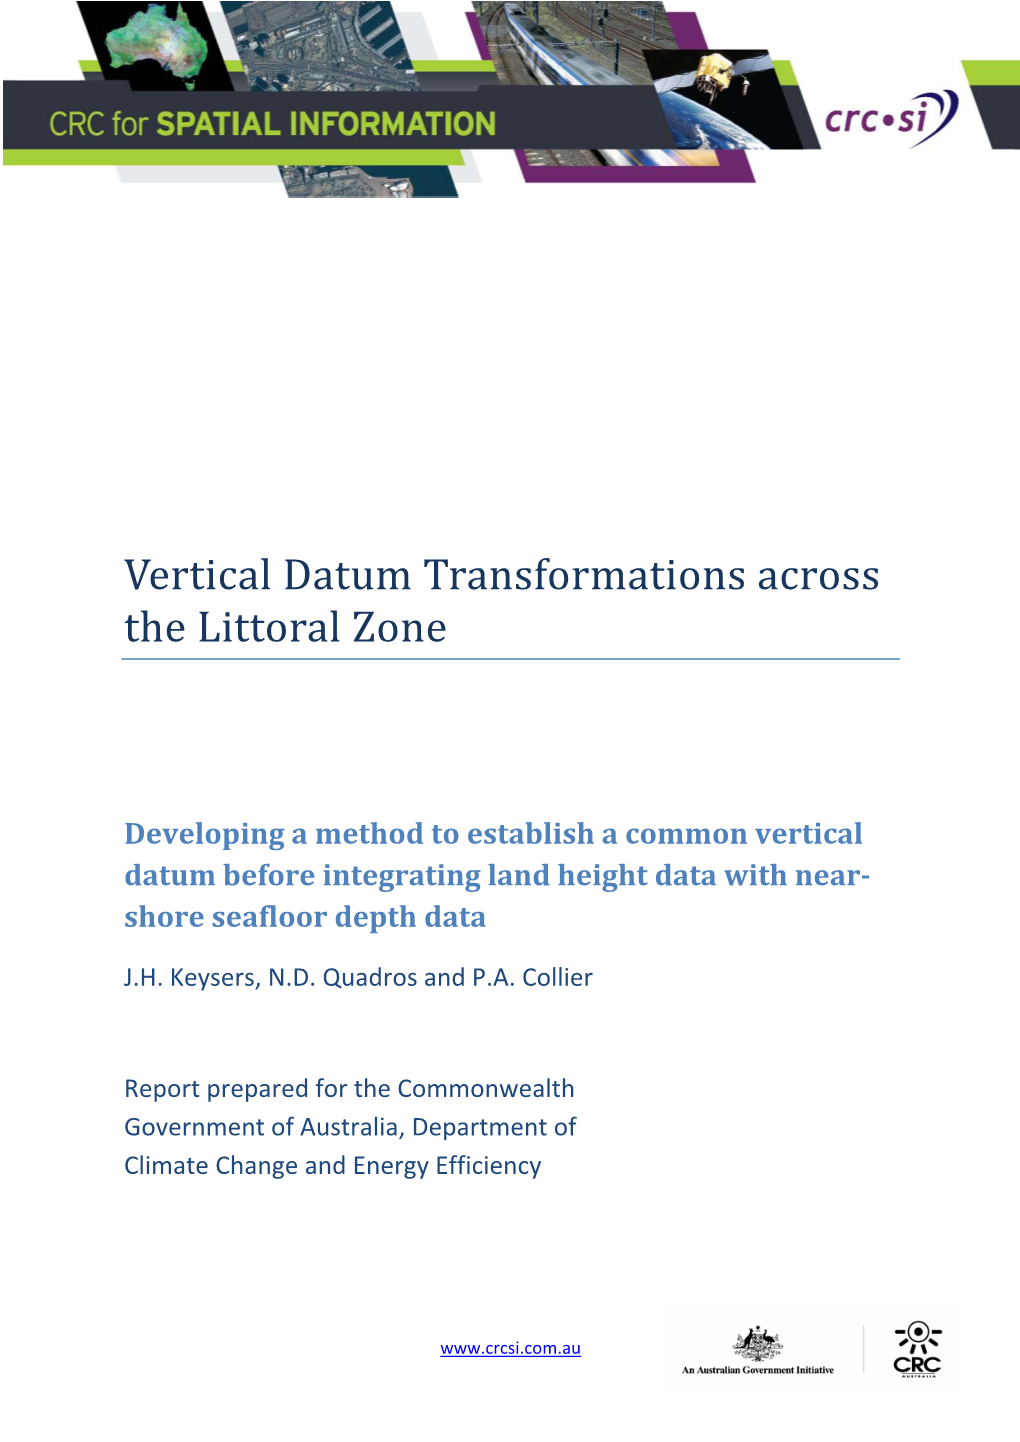 Vertical Datum Transformations Across the Littoral Zone